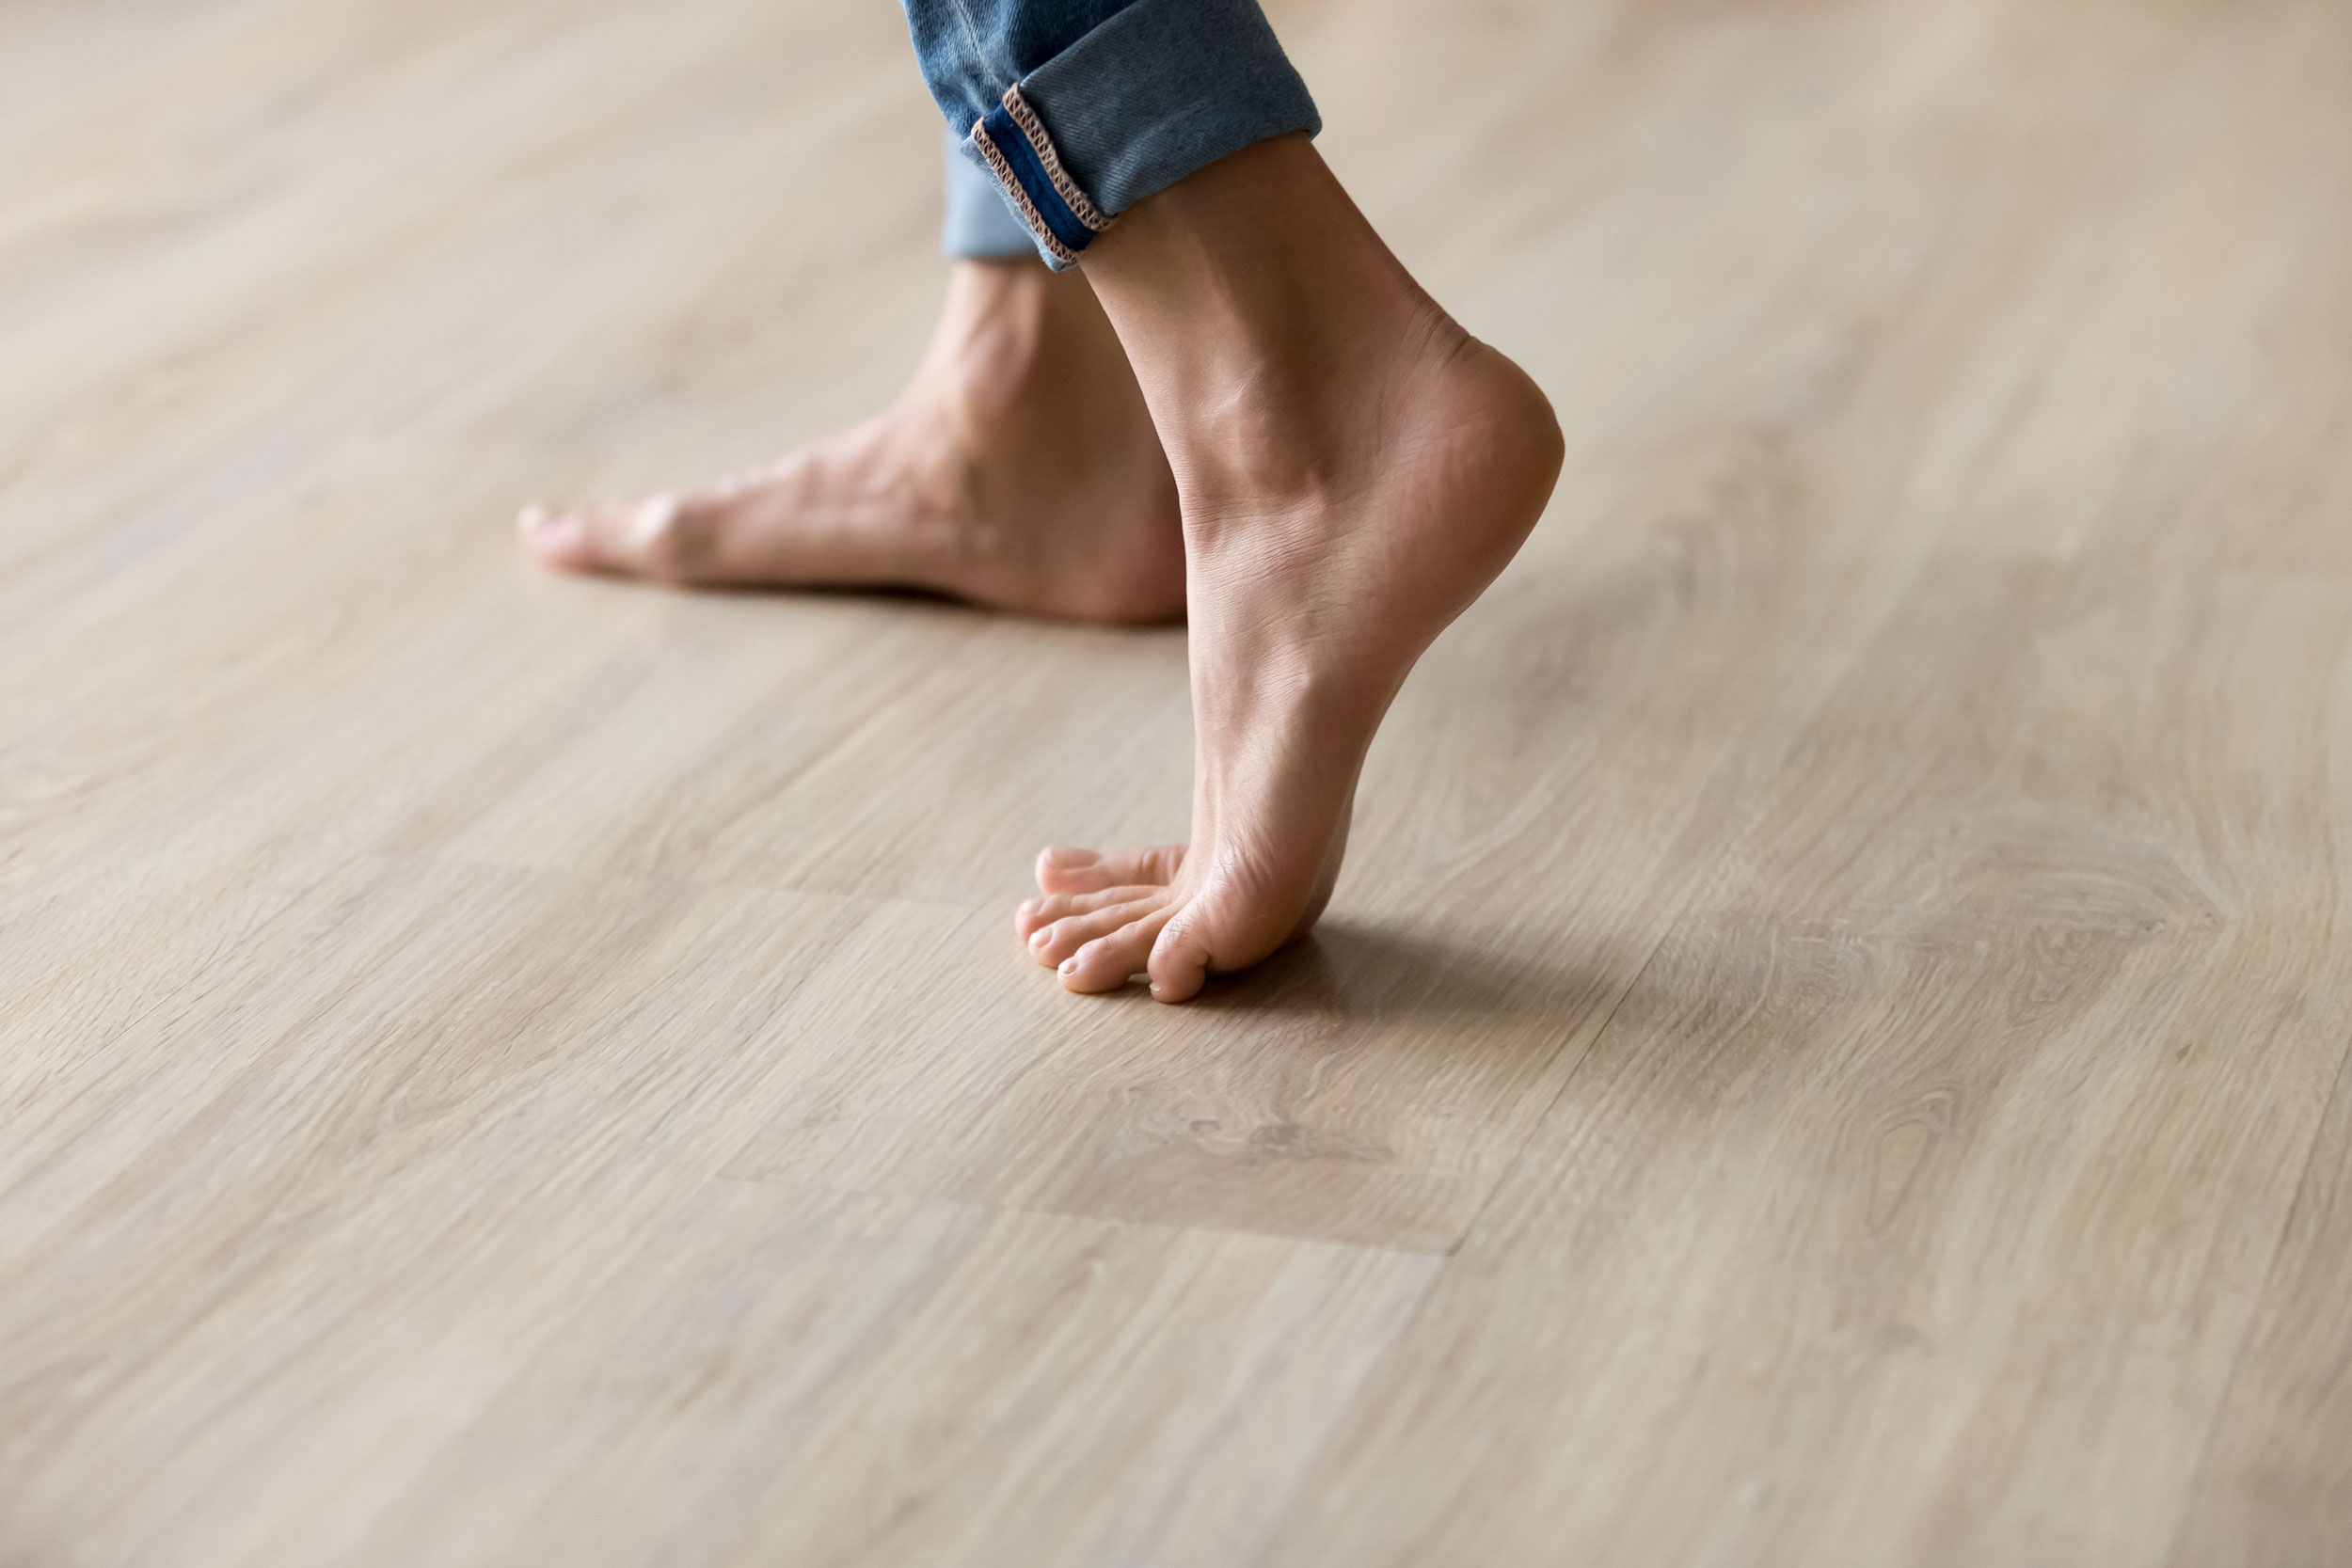 Practical, protective foot health steps for people with diabetes